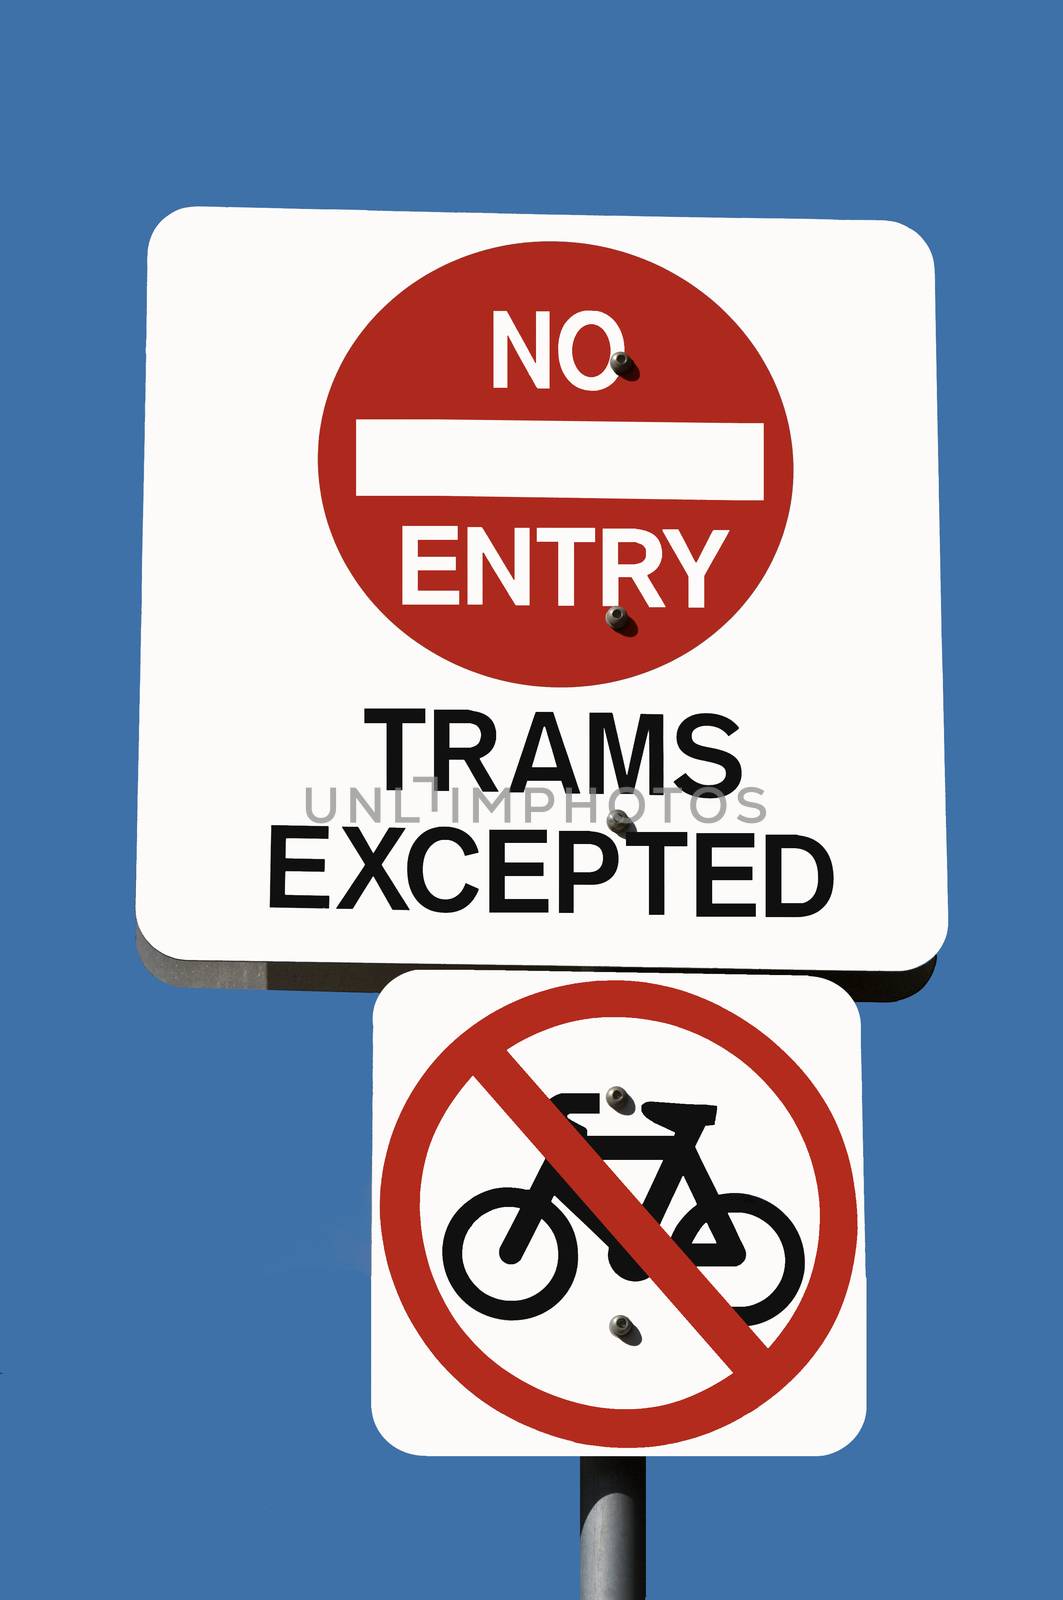 No Entry Bikes and Cars Trams PSD Files by instinia